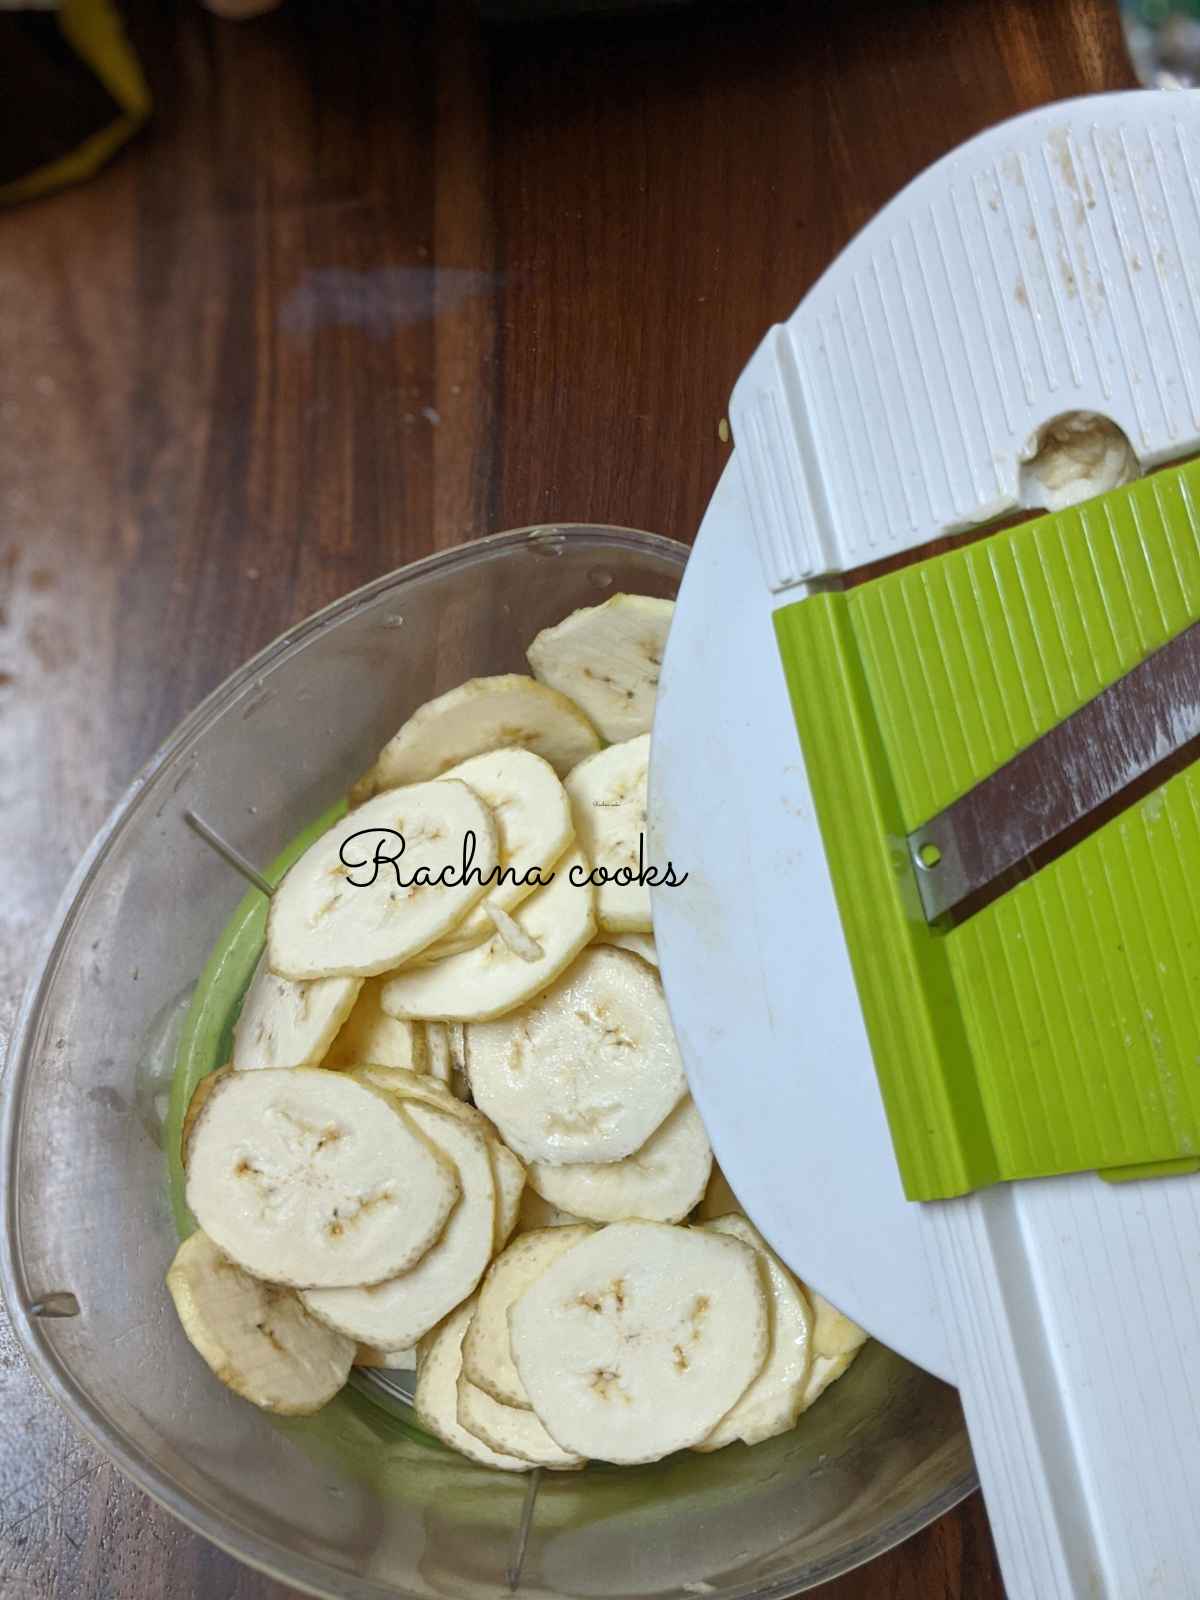 Plantain chips in a bowl with a mandolin slicer visible.